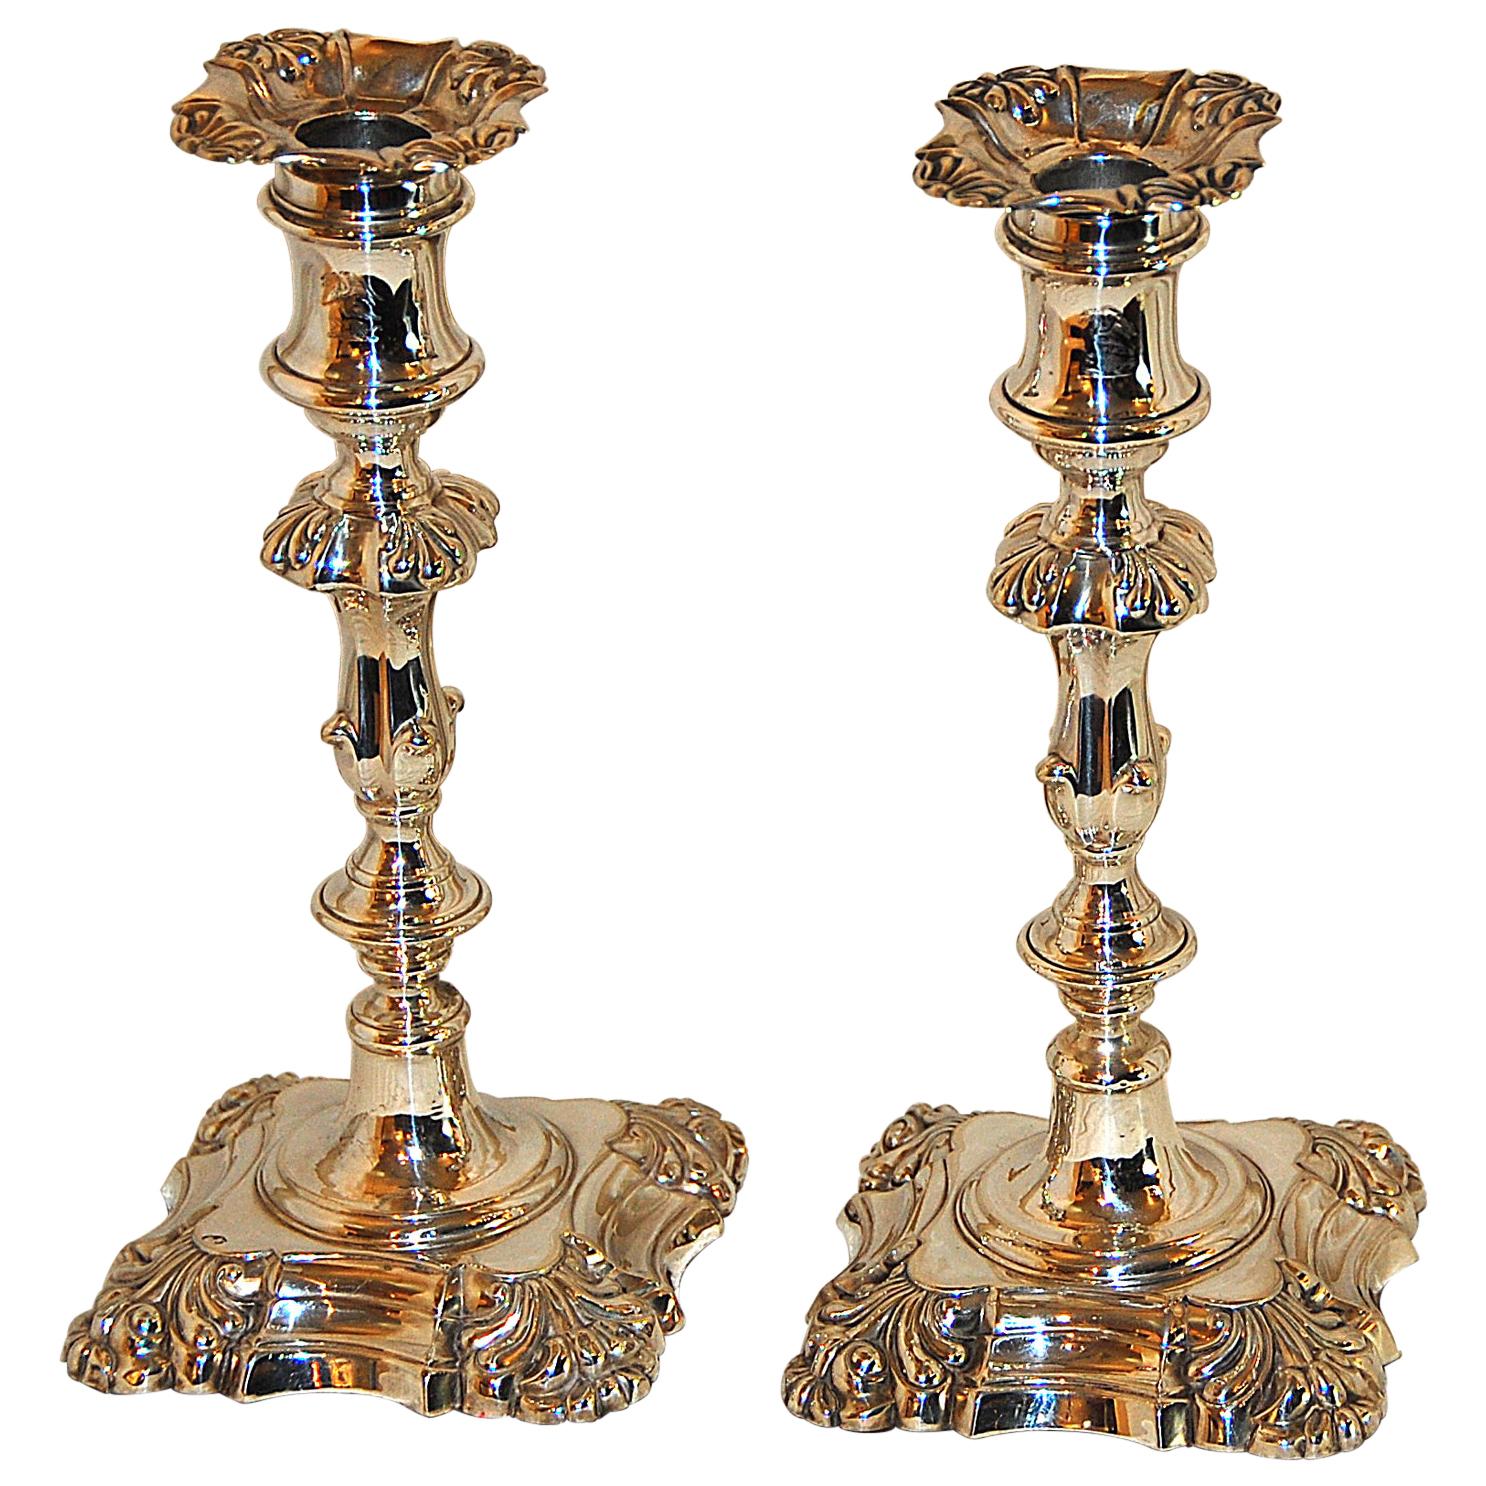 English William IV Sterling Silver Pair of Candlesticks Dated 1836